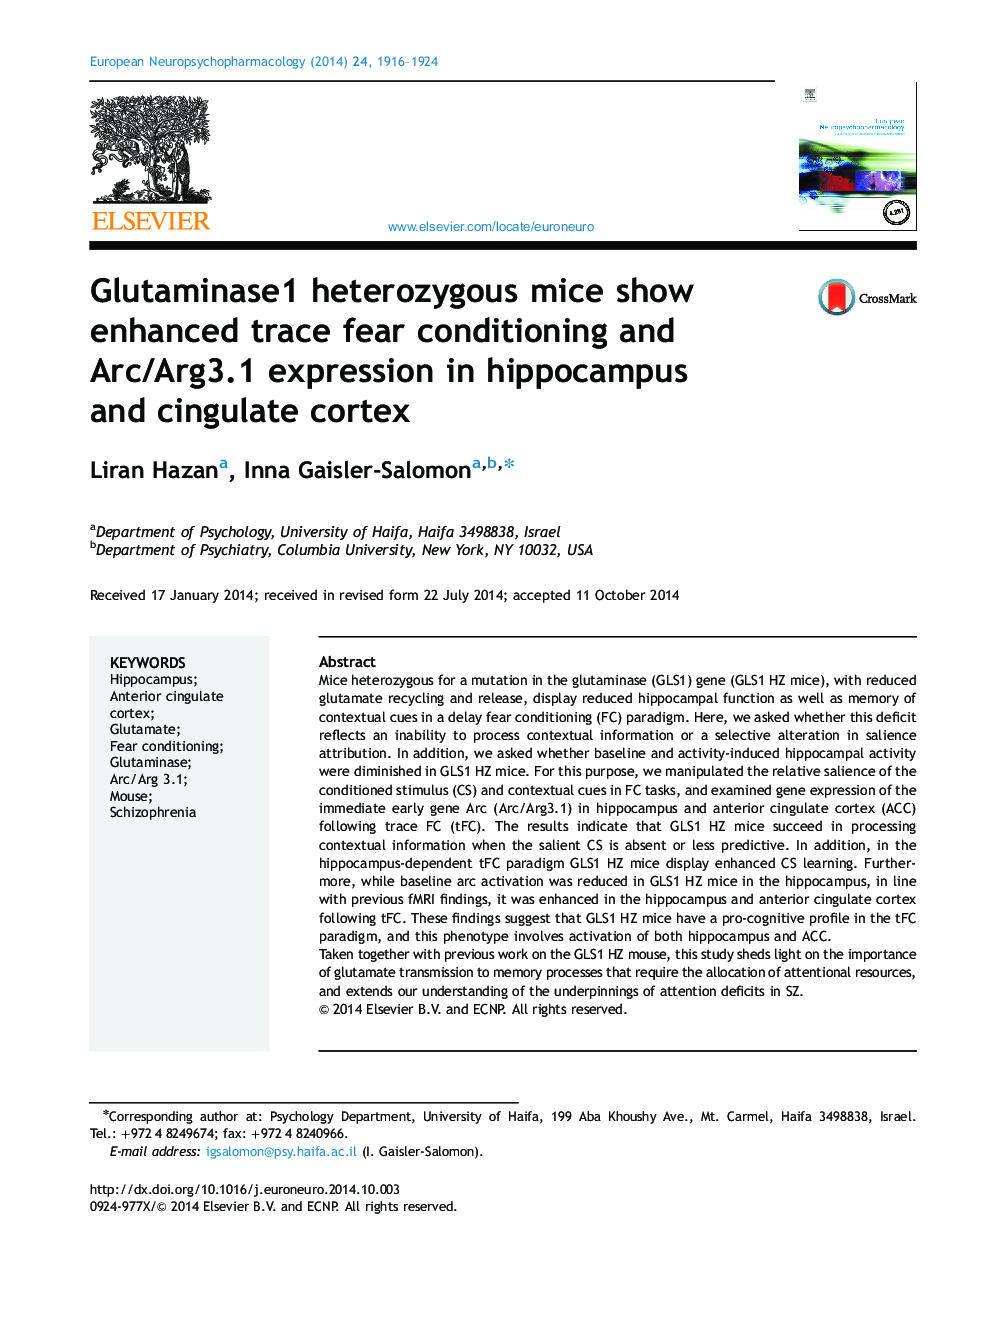 Glutaminase1 heterozygous mice show enhanced trace fear conditioning and Arc/Arg3.1 expression in hippocampus and cingulate cortex